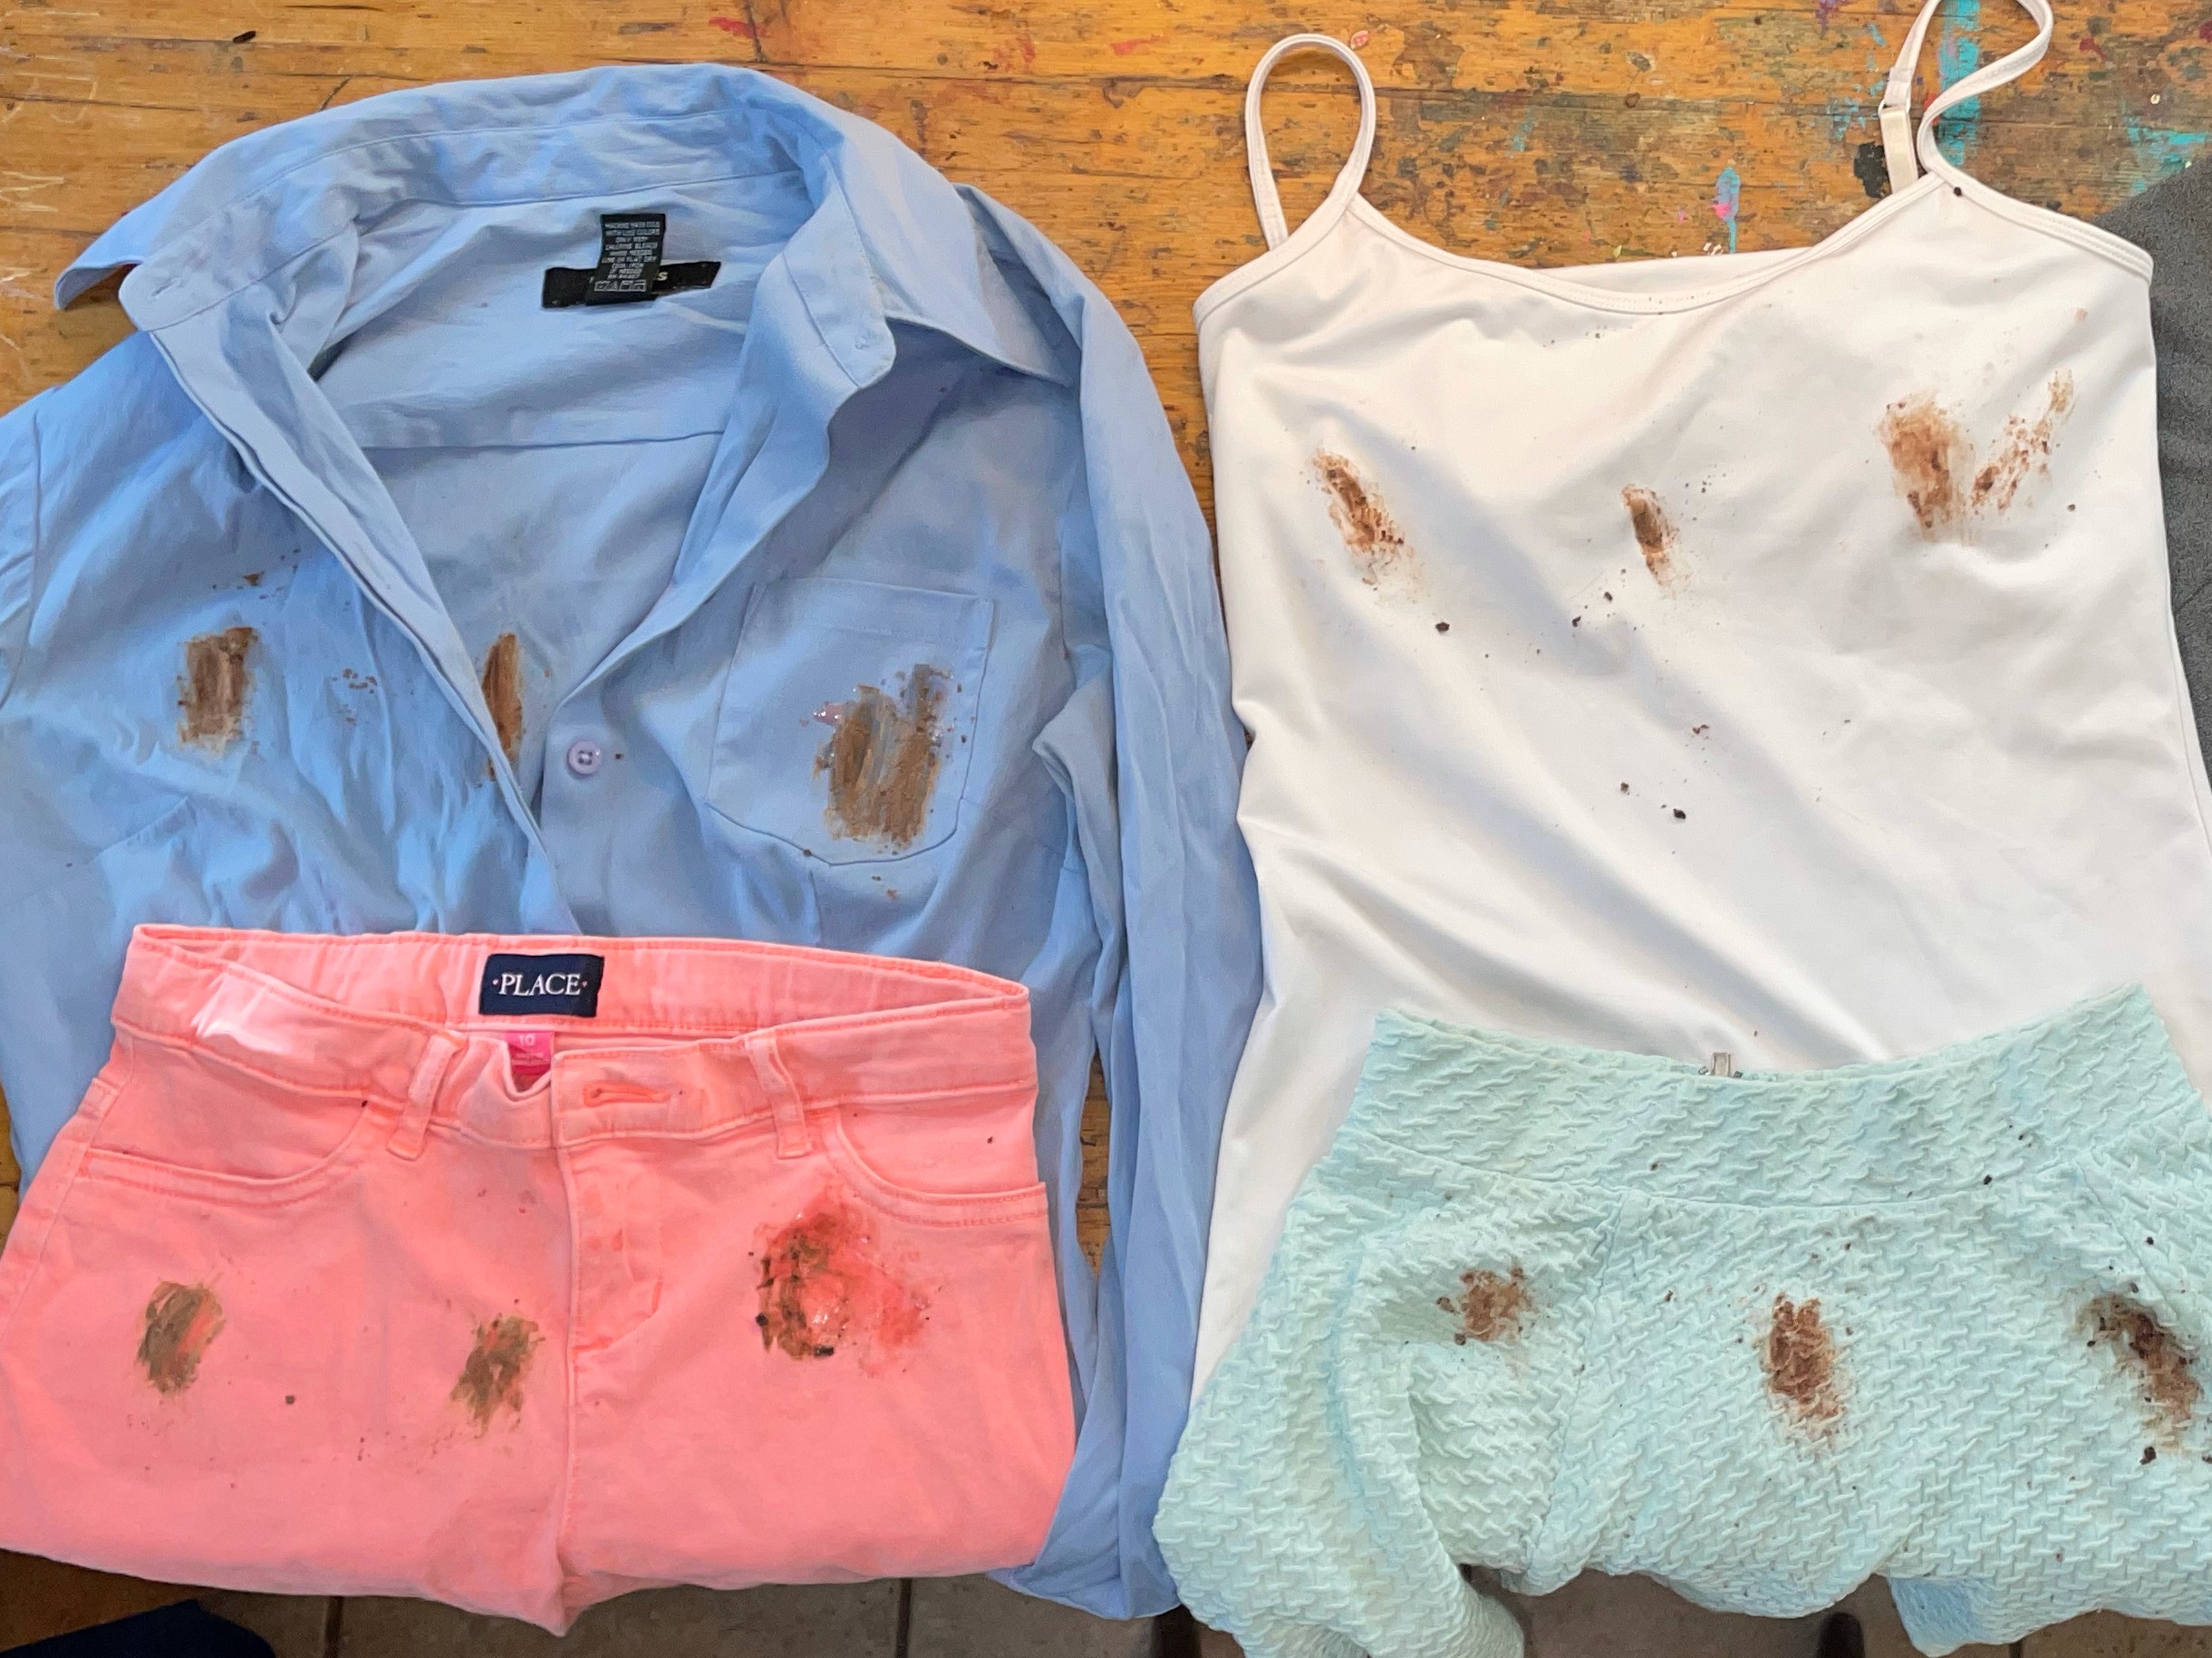 Images of shirts stained with chocolate before stain removal.